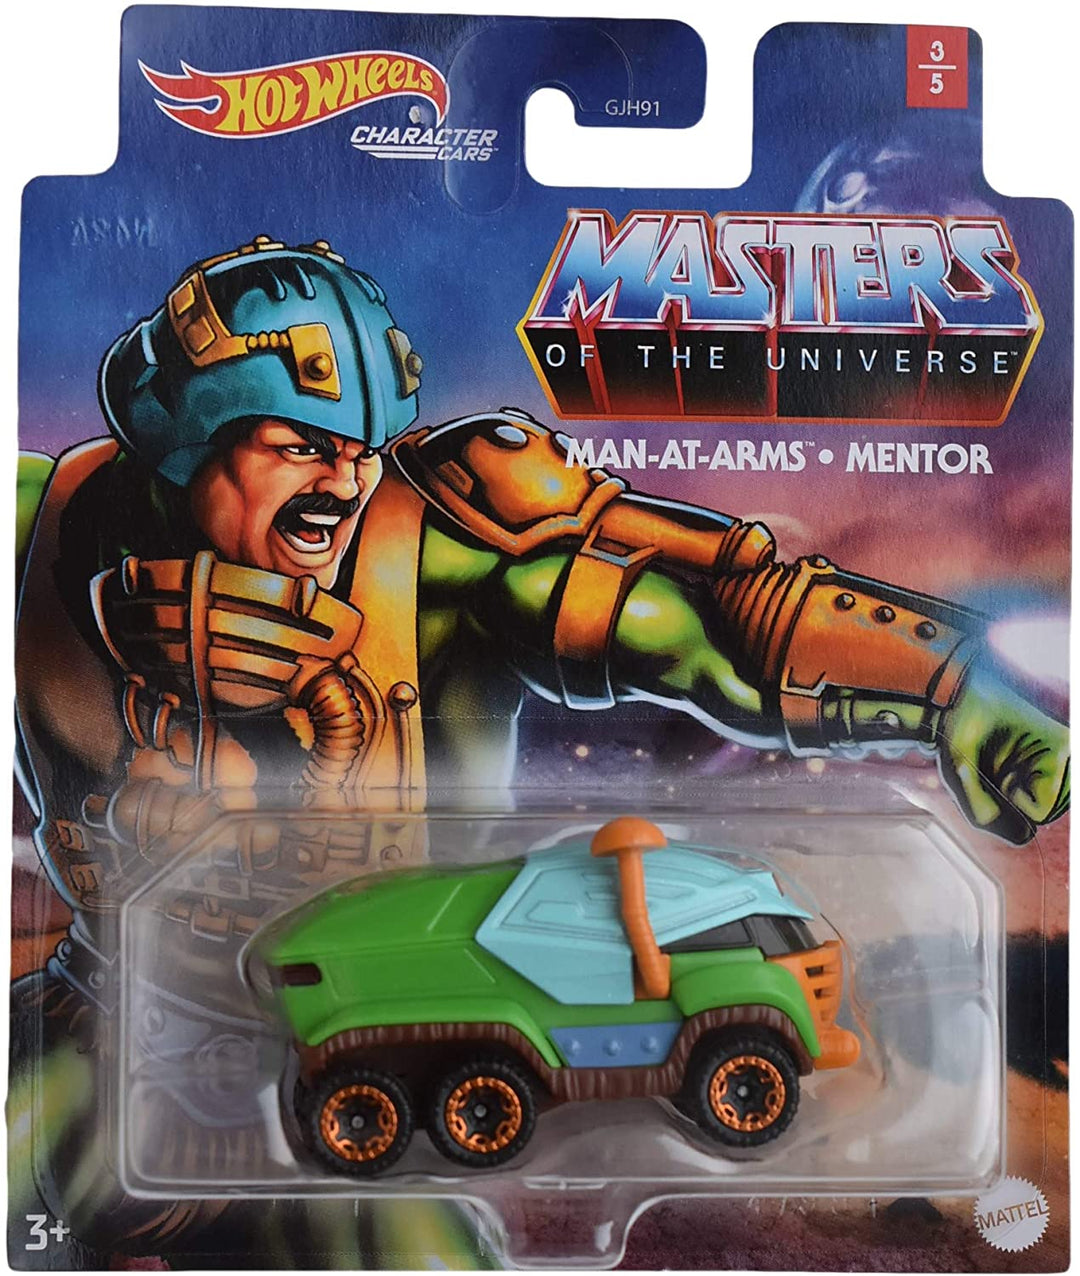 Character Cars Hot Wheels Masters of The Universe - Car Vehicle - Man at Arms Mentor - Die-cast 1:64 Scale